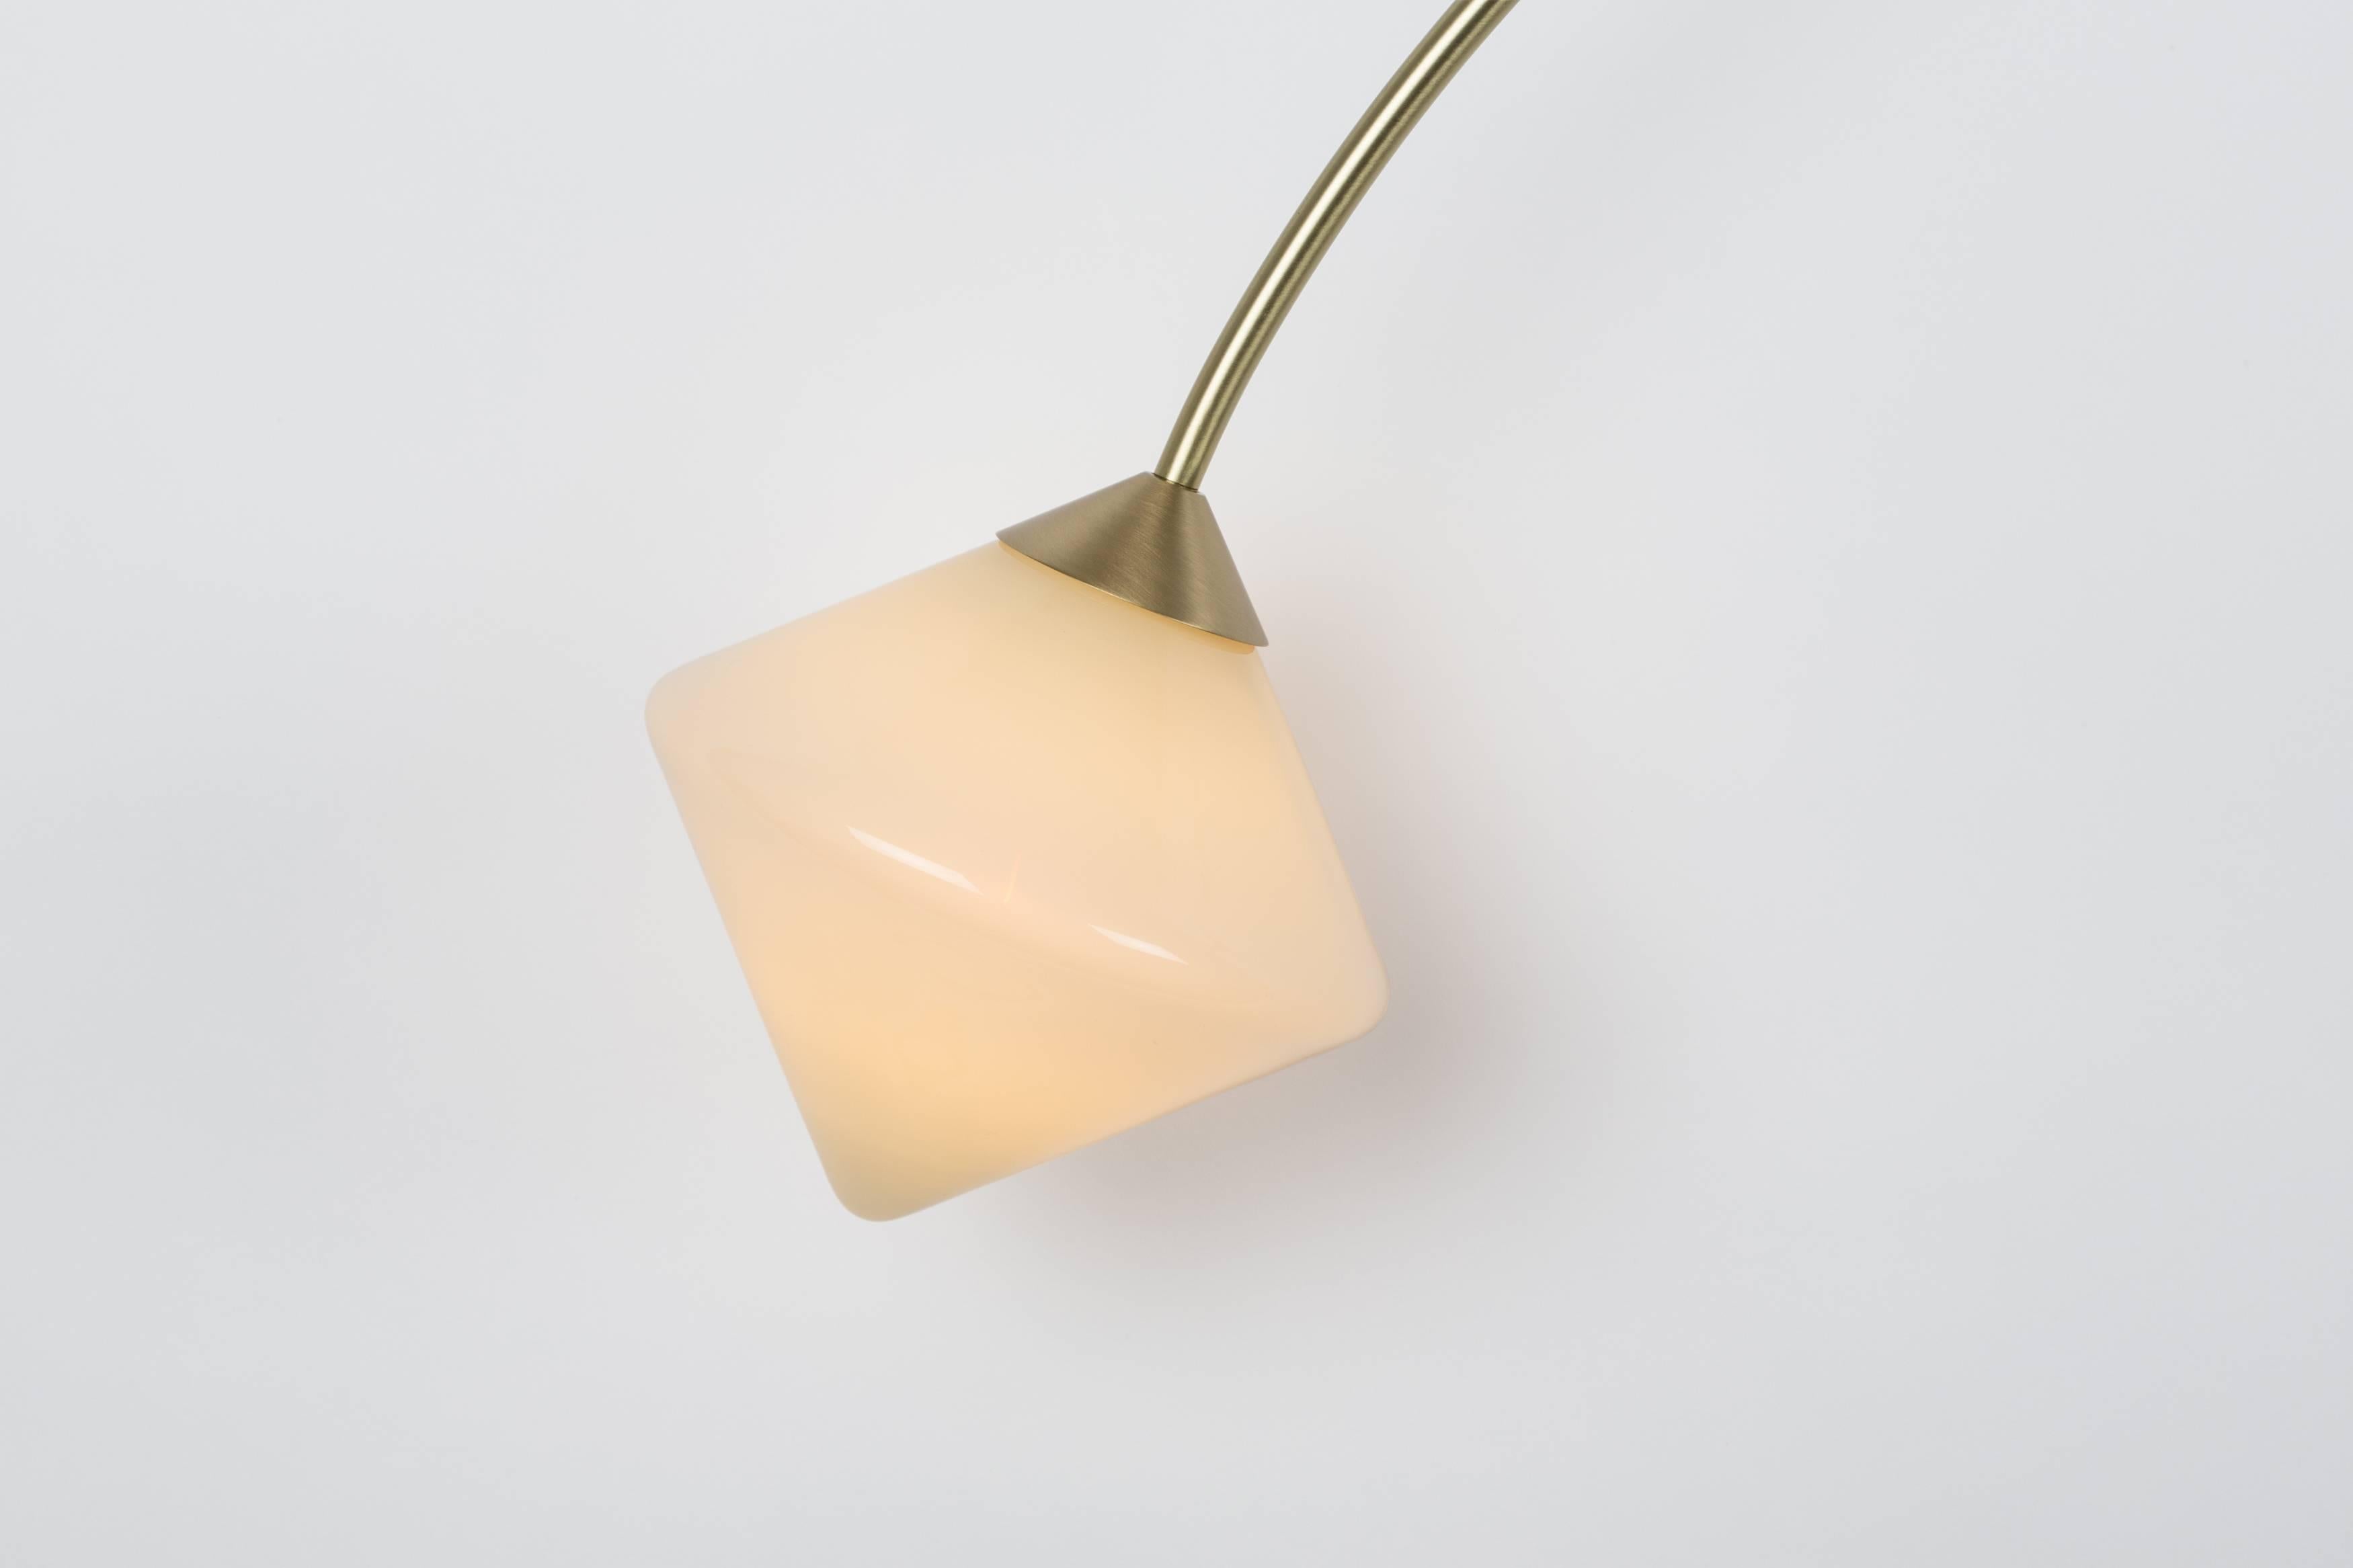 Originally inspired by Victorian balancing toys, Themis combines handblown glass diffusers with an elegant marble and brass bracket to provide a soft glow. The forms are derived from triangular forms manipulated through rotation, mirroring and